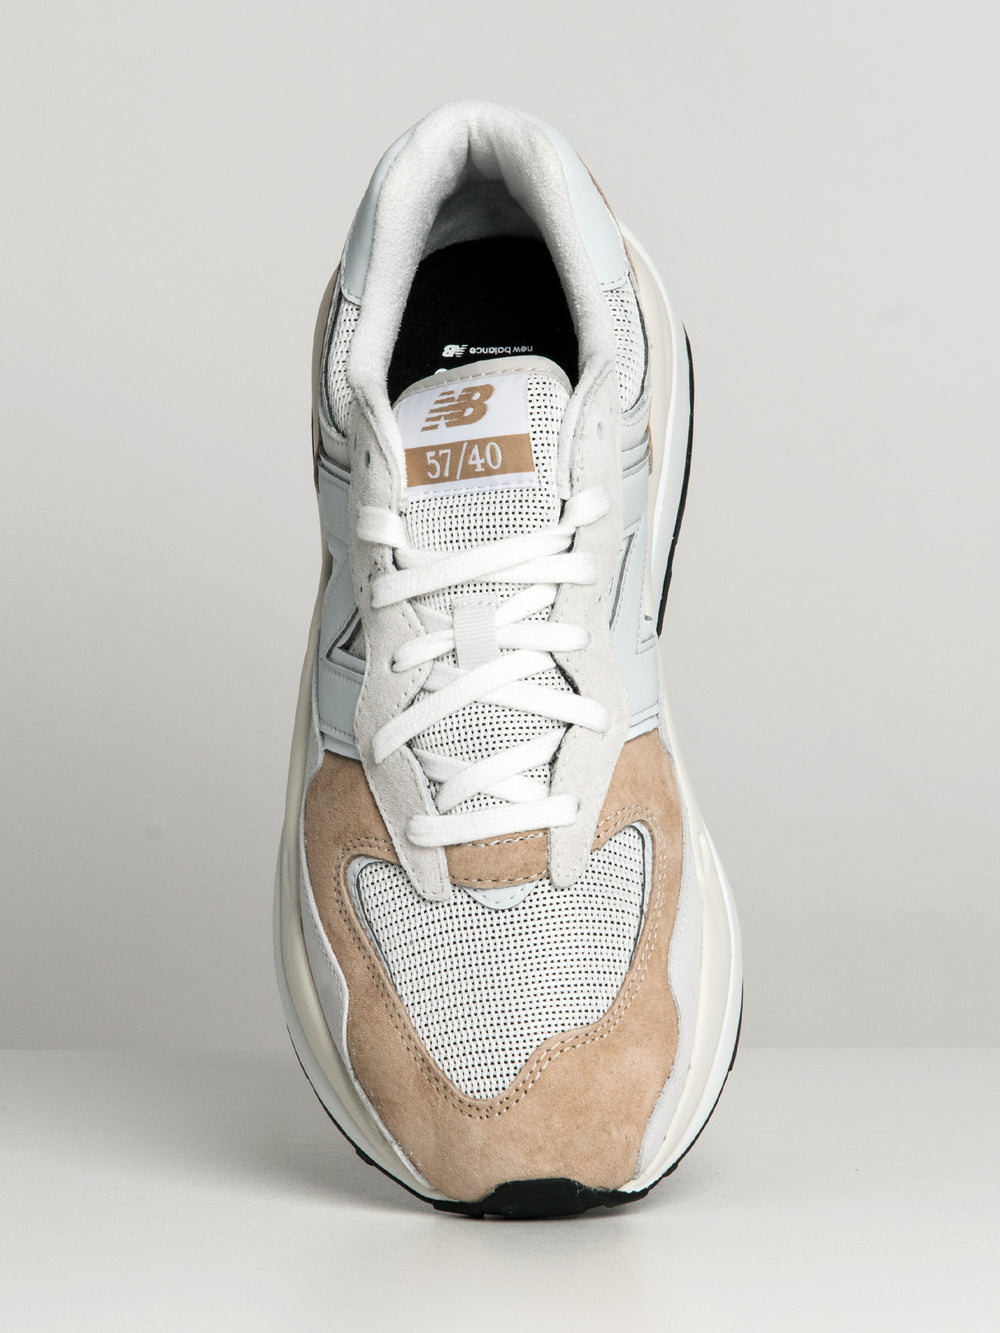 MENS NEW BALANCE THE 5740 SNEAKER - CLEARANCE